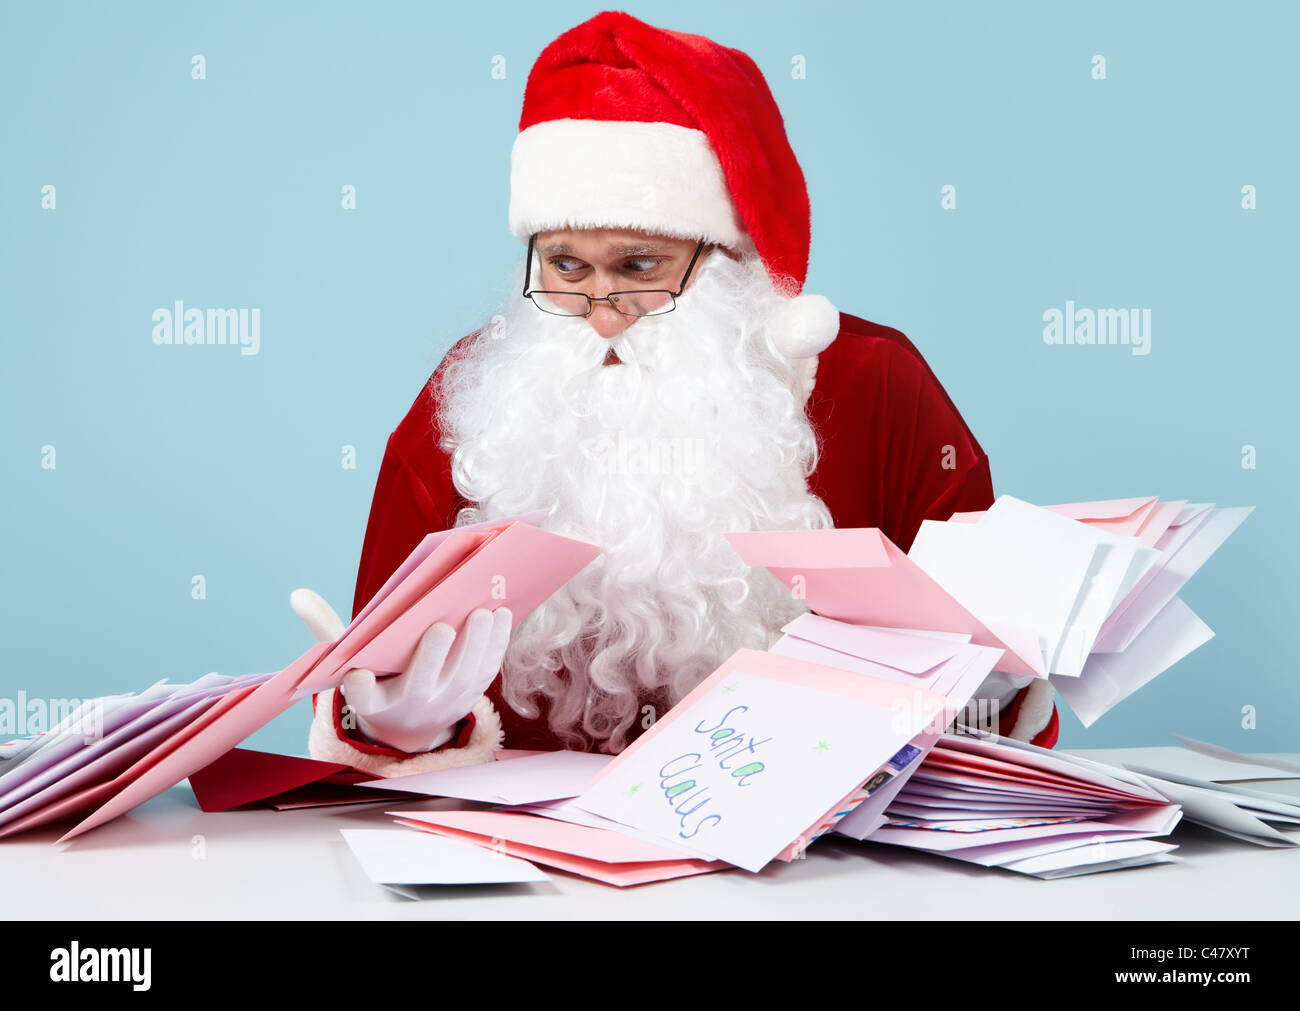 Image of Santa Claus looking at heap of letters with terrified expression Stock Photo